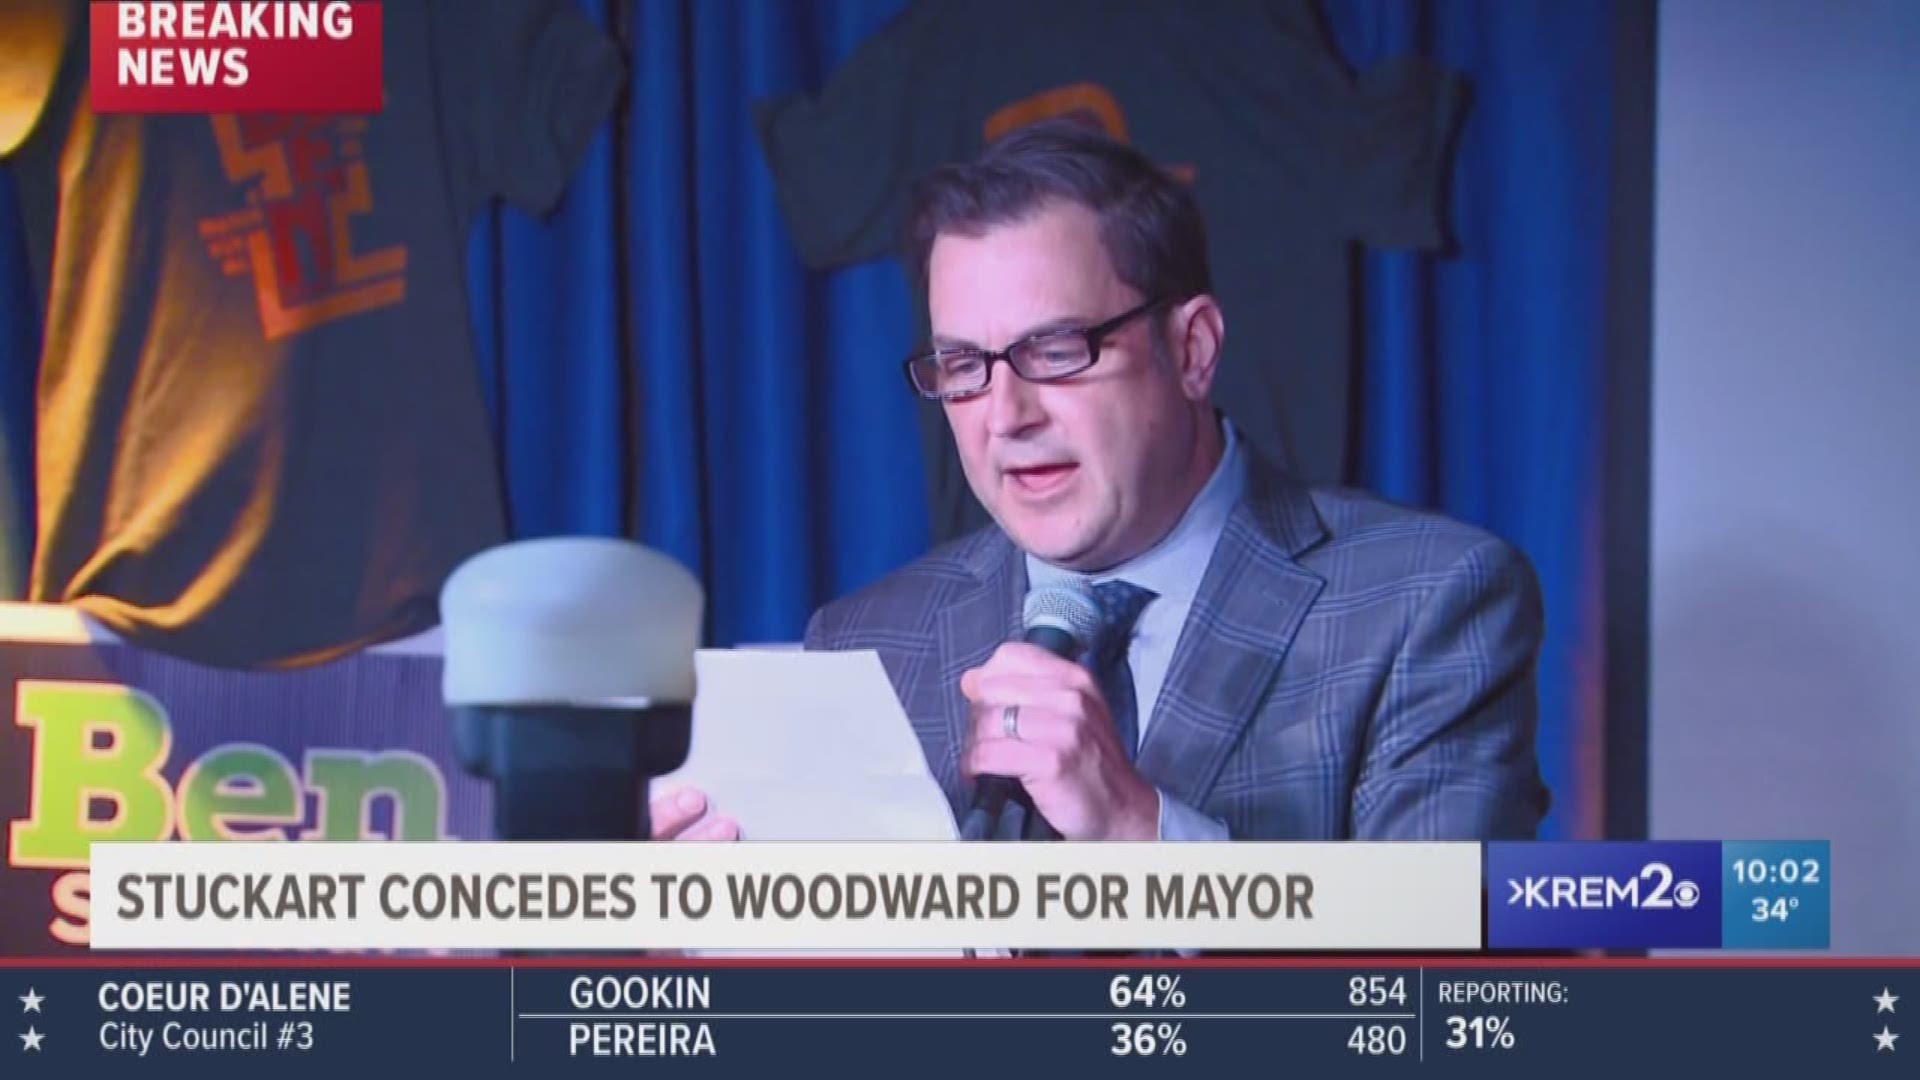 During her victory speech, Mayor-Elect Nadine Woodward said she will surround herself with experts to move the city forward and be its biggest advocate.